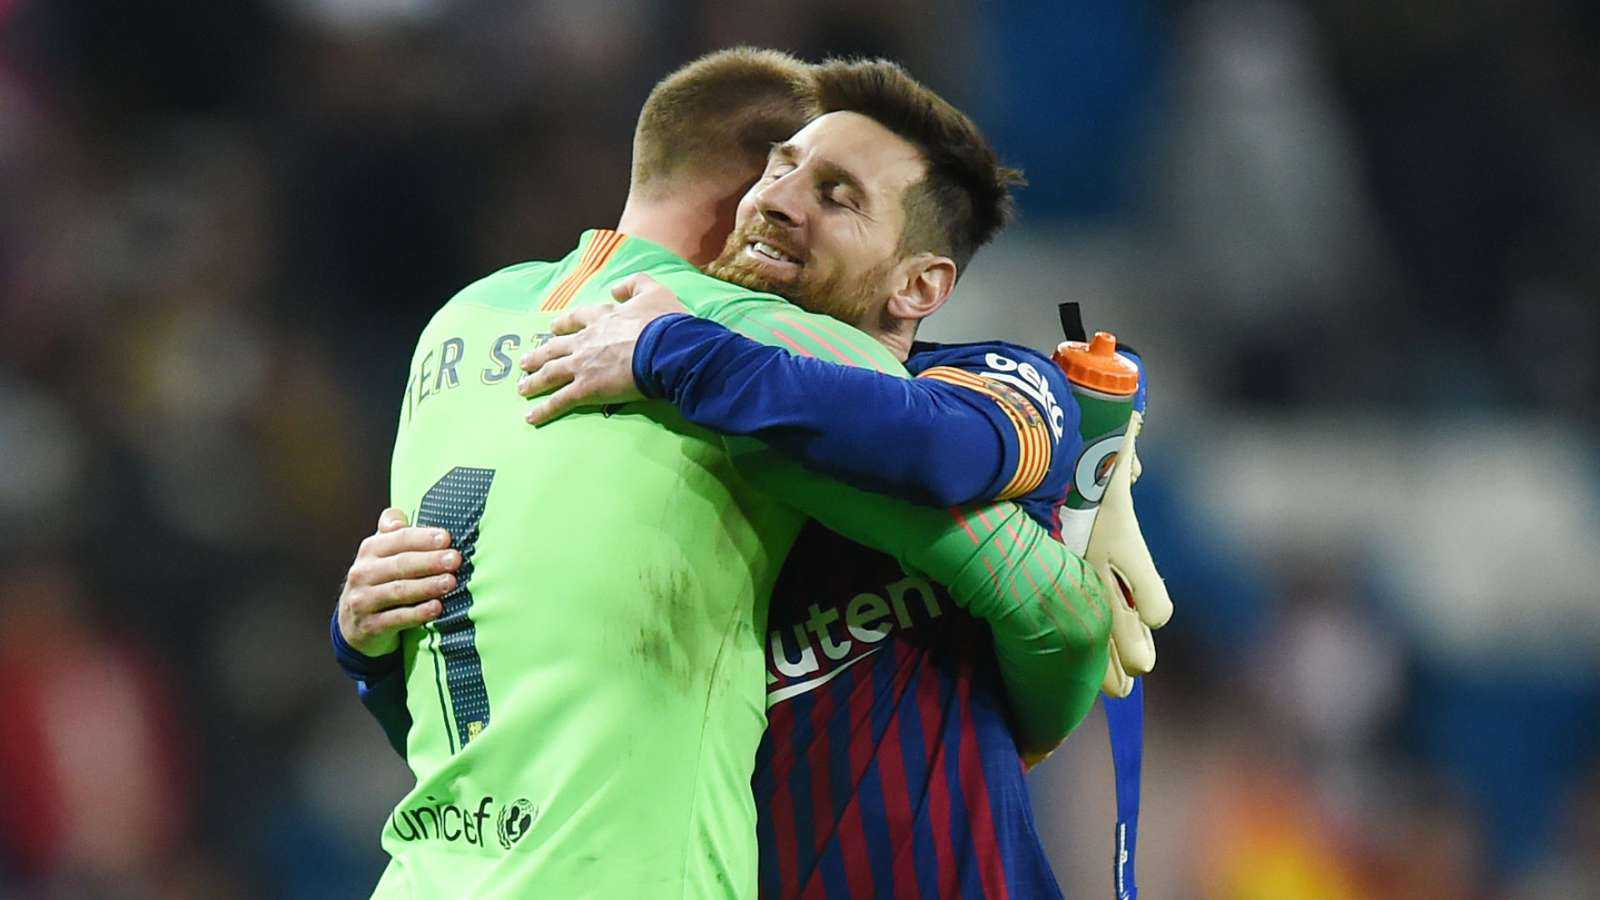 No Messi, no problem: Barcelona's other saviour Ter Stegen both stops and create goals!